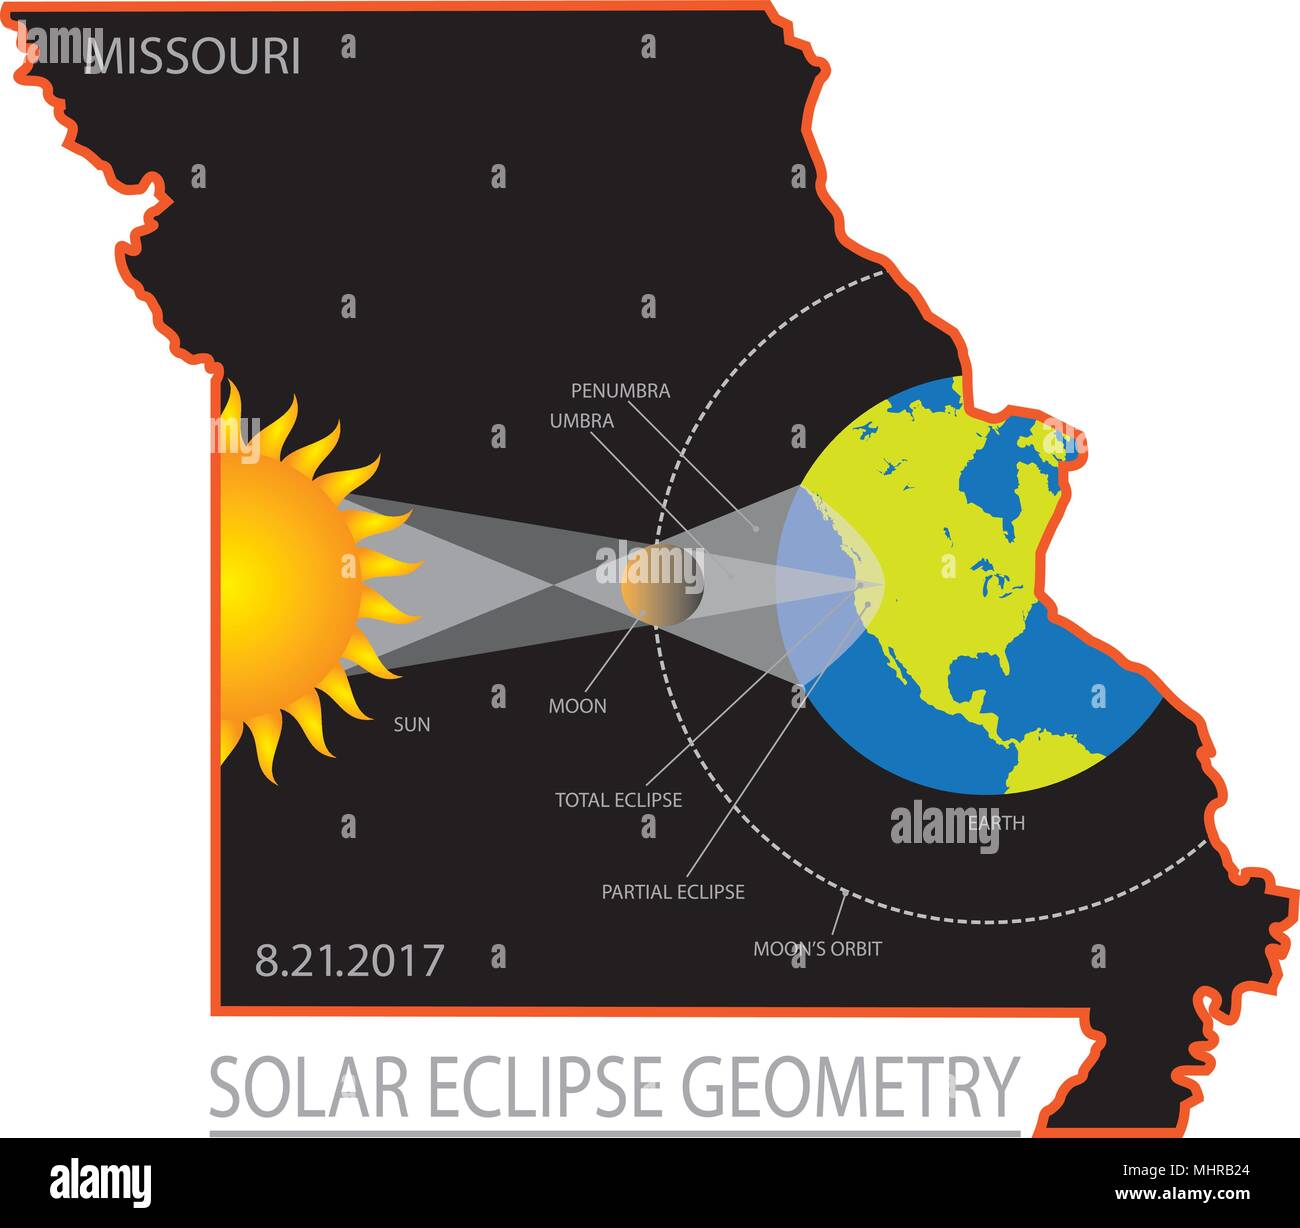 2017 Solar Eclipse Totality Geometry across Missouri State cities map color illustration Stock Vector